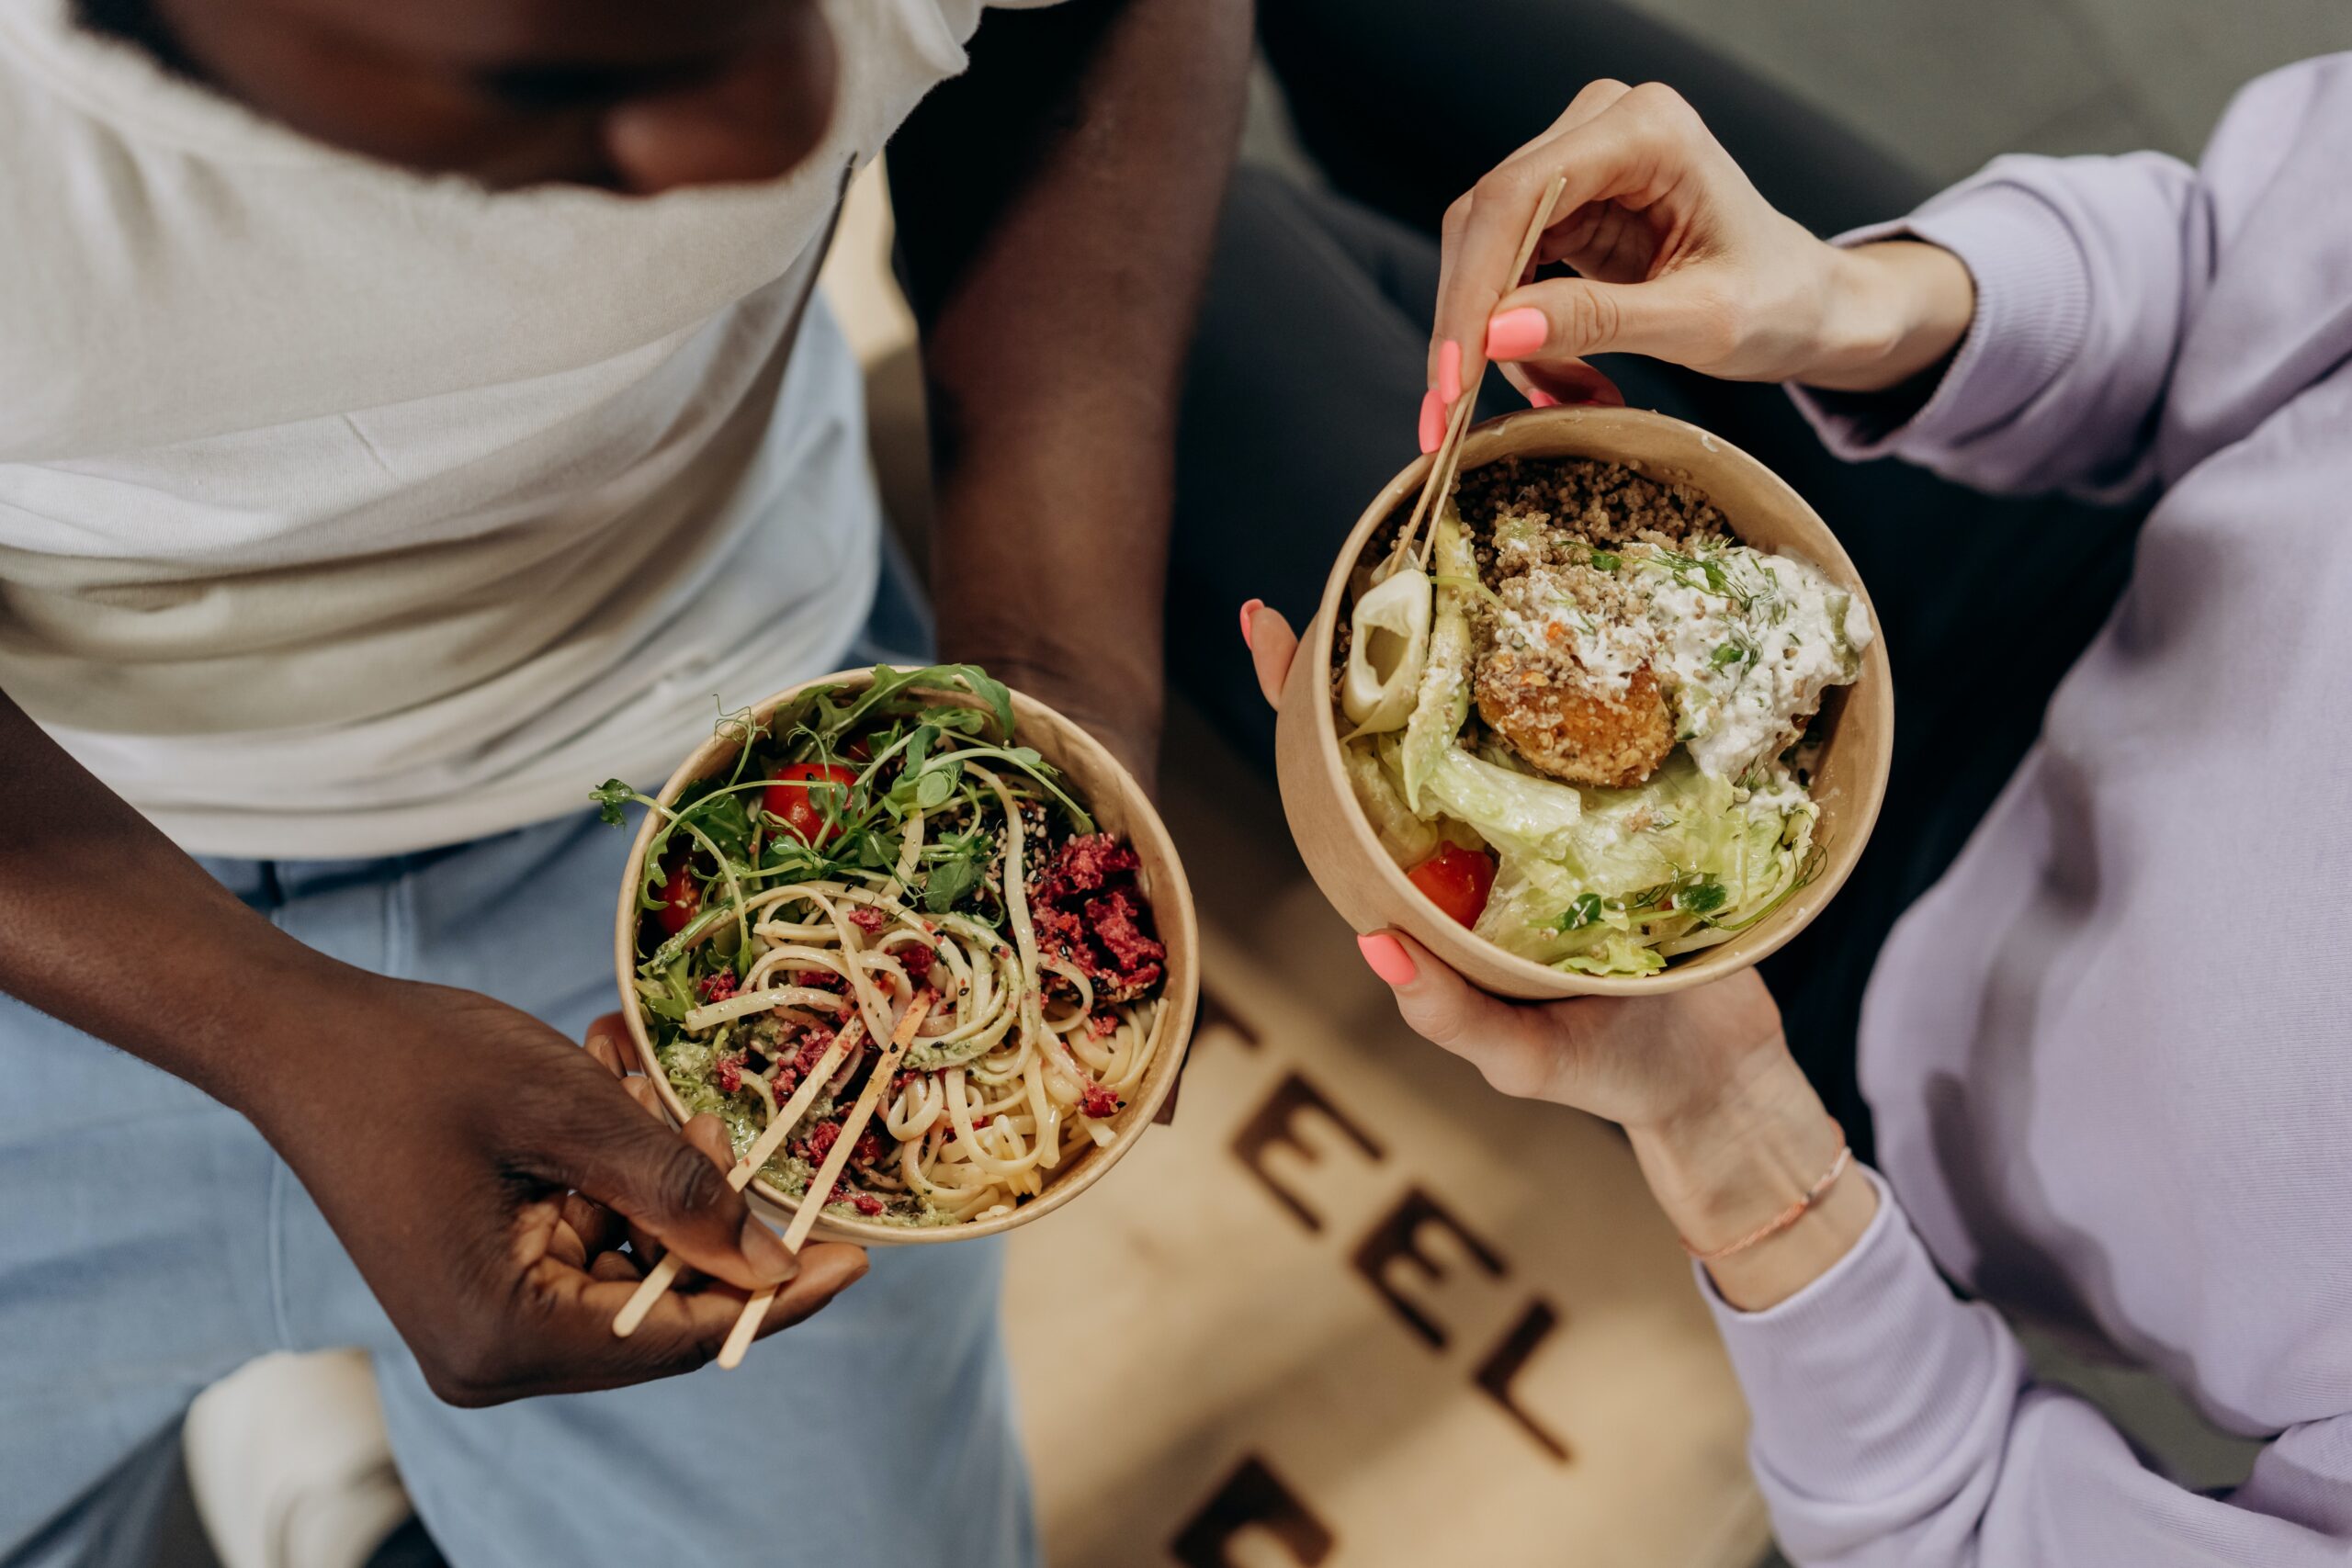 Two people sharing a casual meal, each holding a bowl filled with a healthy and colorful salad, enjoying a moment of connection over delicious-looking food.